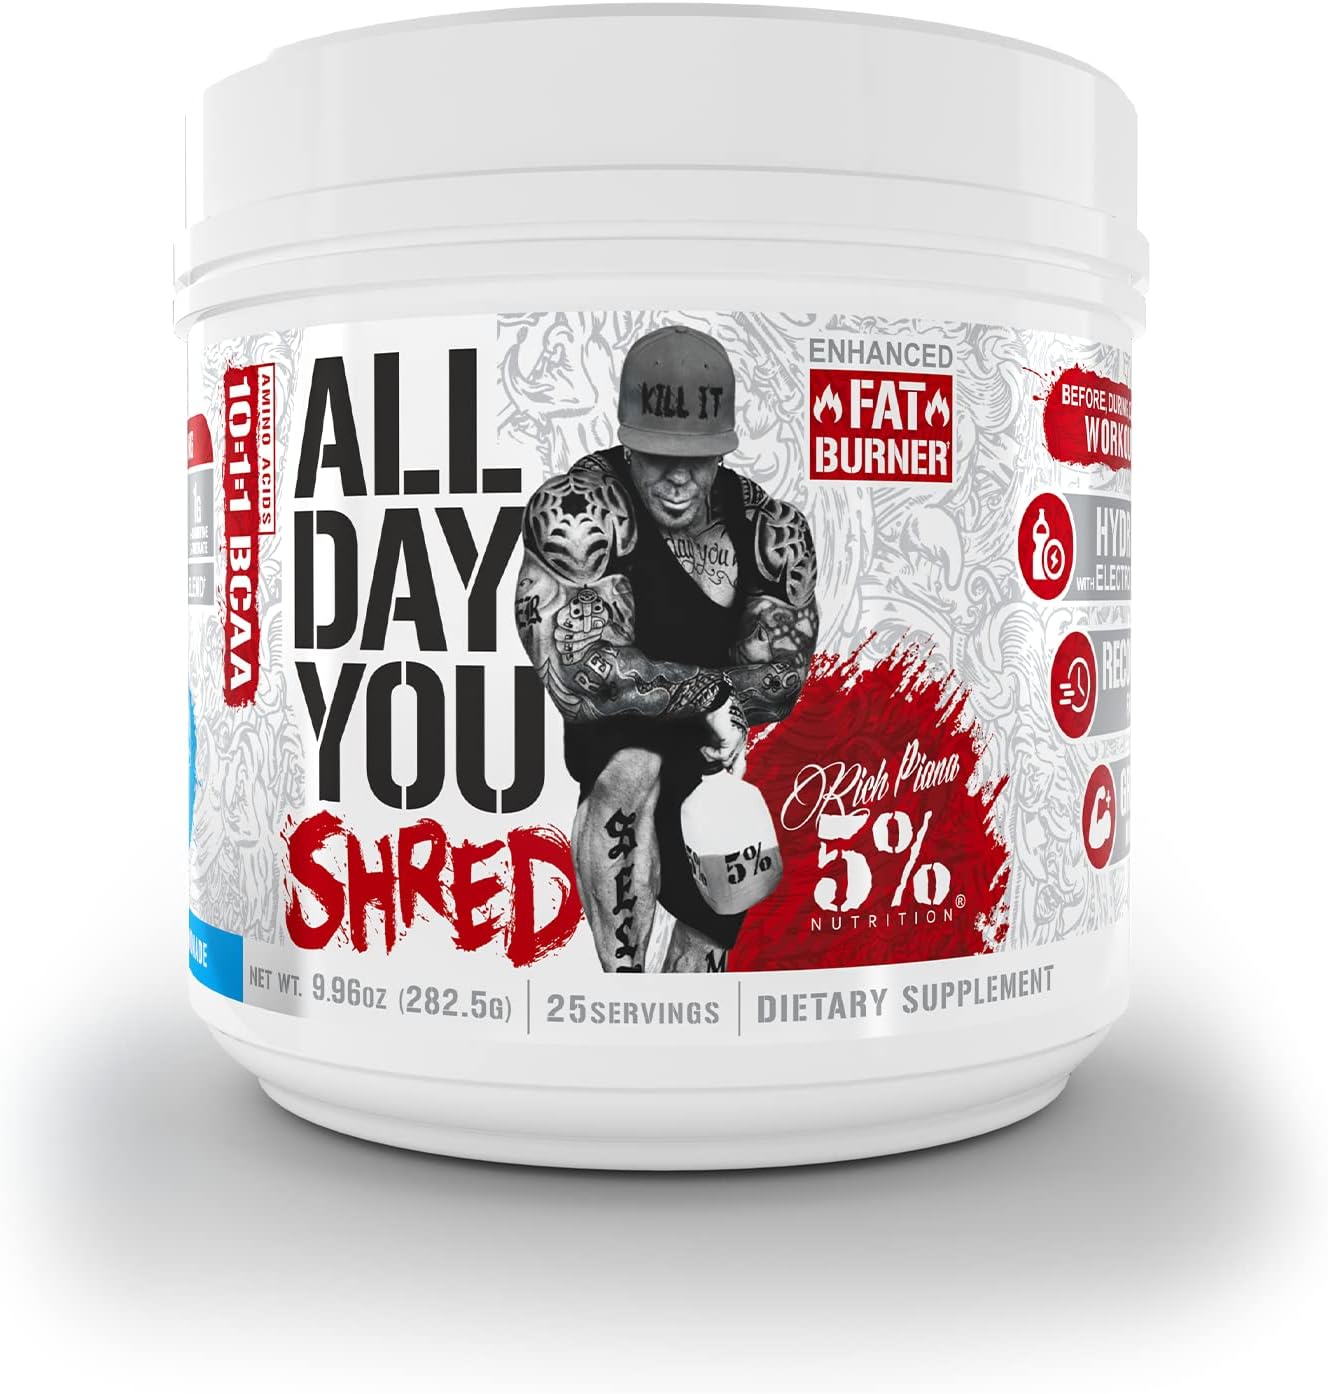 5% Nutrition Rich Piana AllDayYou Shred BCAA Powder | Amino Acid Supplement for Weight Loss | Elite Fat Burning Pre Workout for Energy, Hydration, Endurance & Recovery (Blueberry Lemonade)